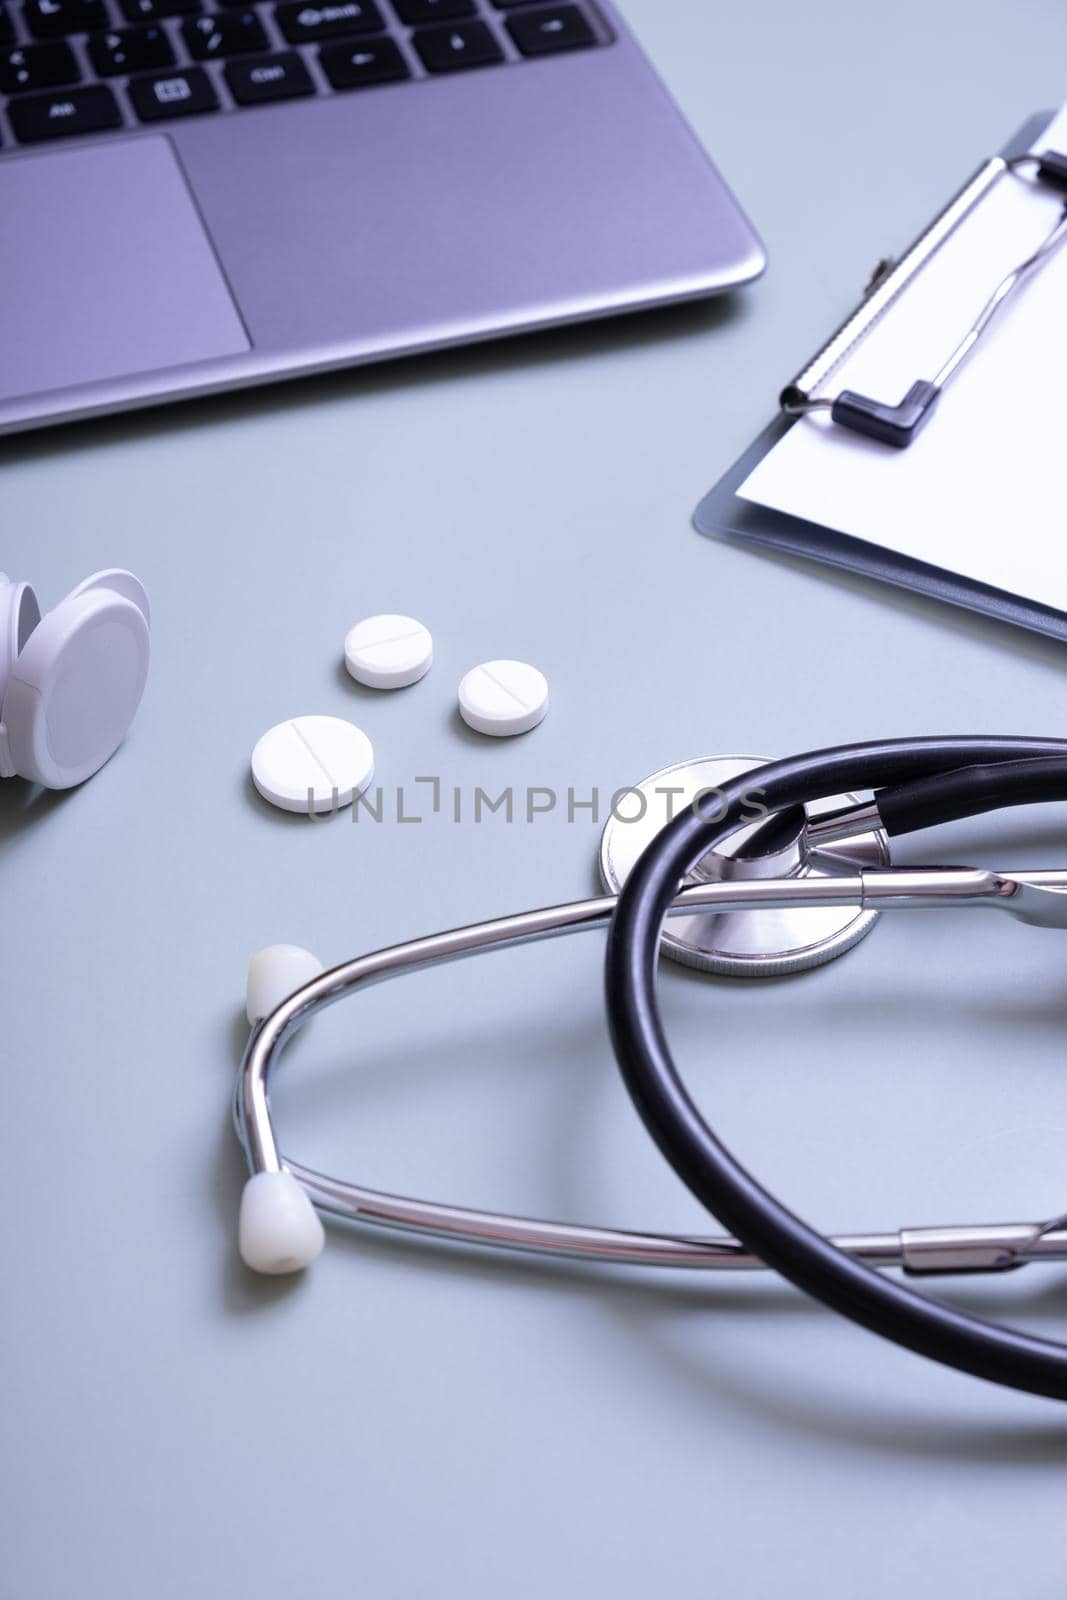 Stethoscope, pills with a container on the desktop on the background of a laptop and a tablet